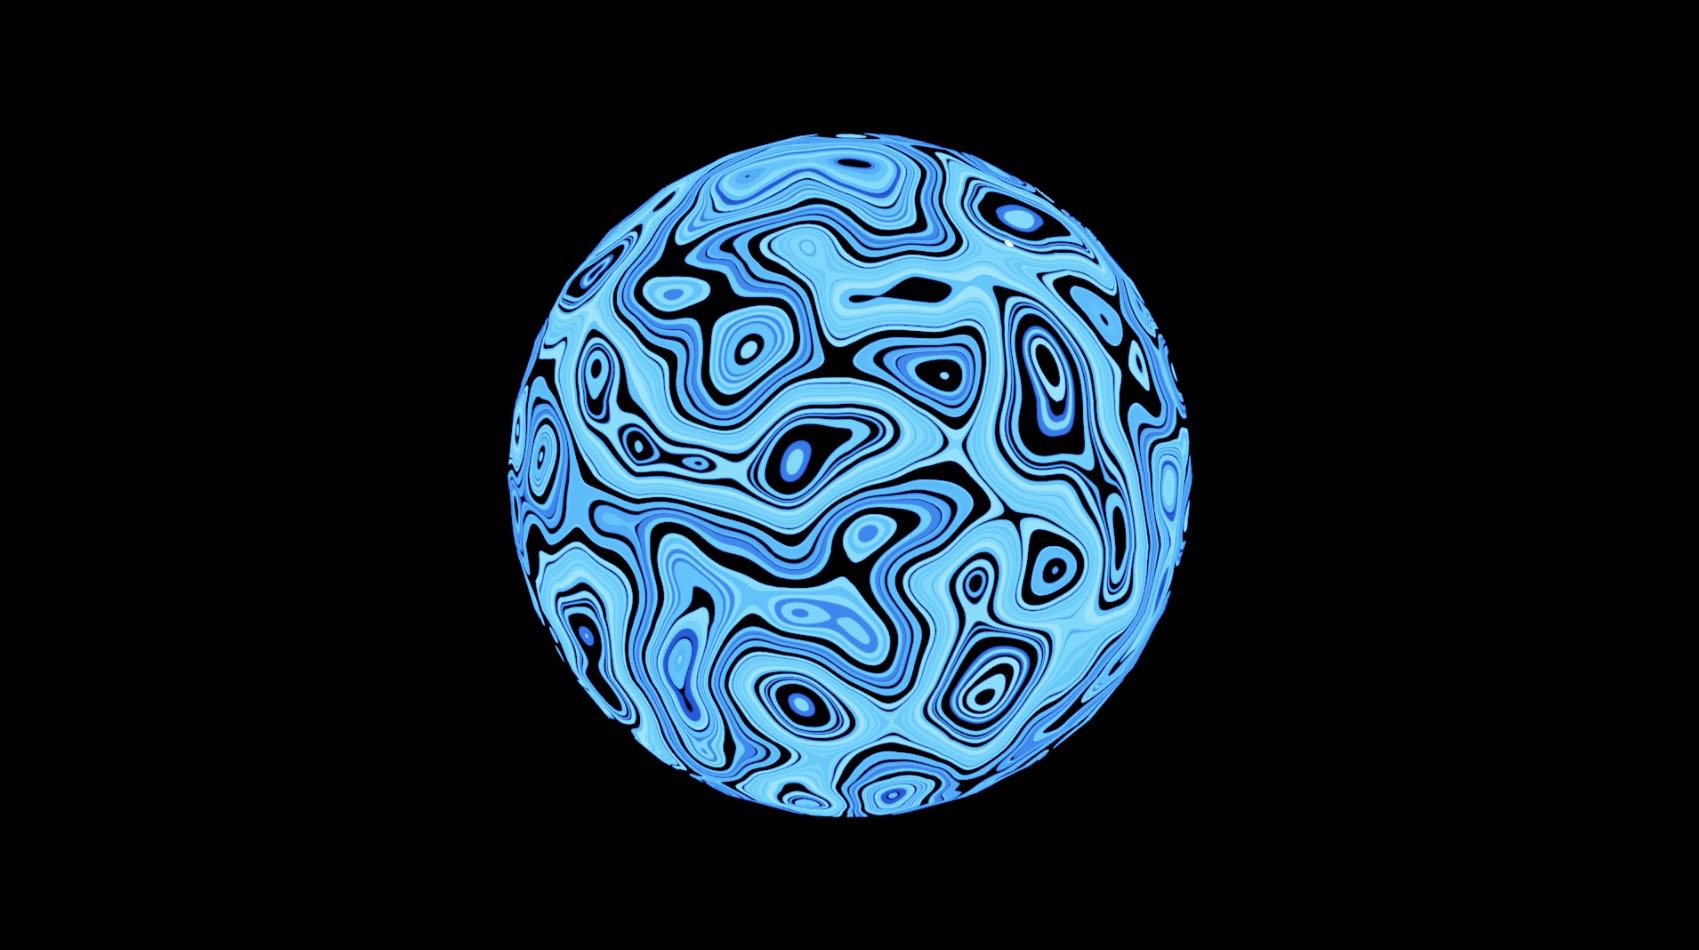 A large sphere with wavey black designs. It emits bright blue light.